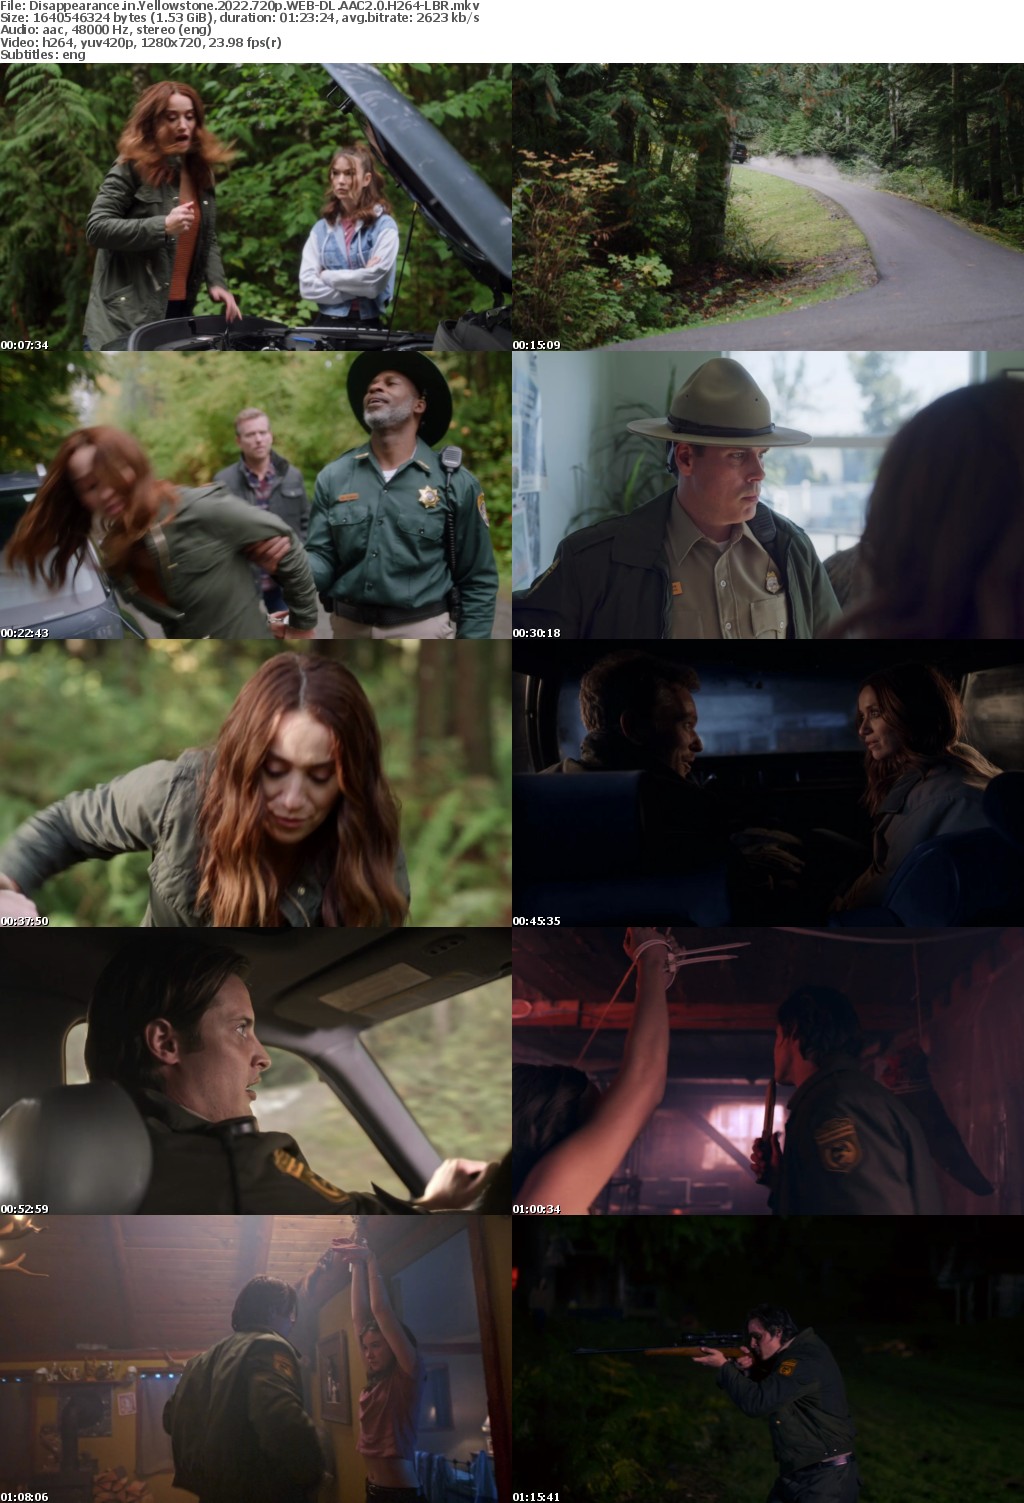 Disappearance In Yellowstone 2022 720p WEB-DL AAC2 0 H264-LBR